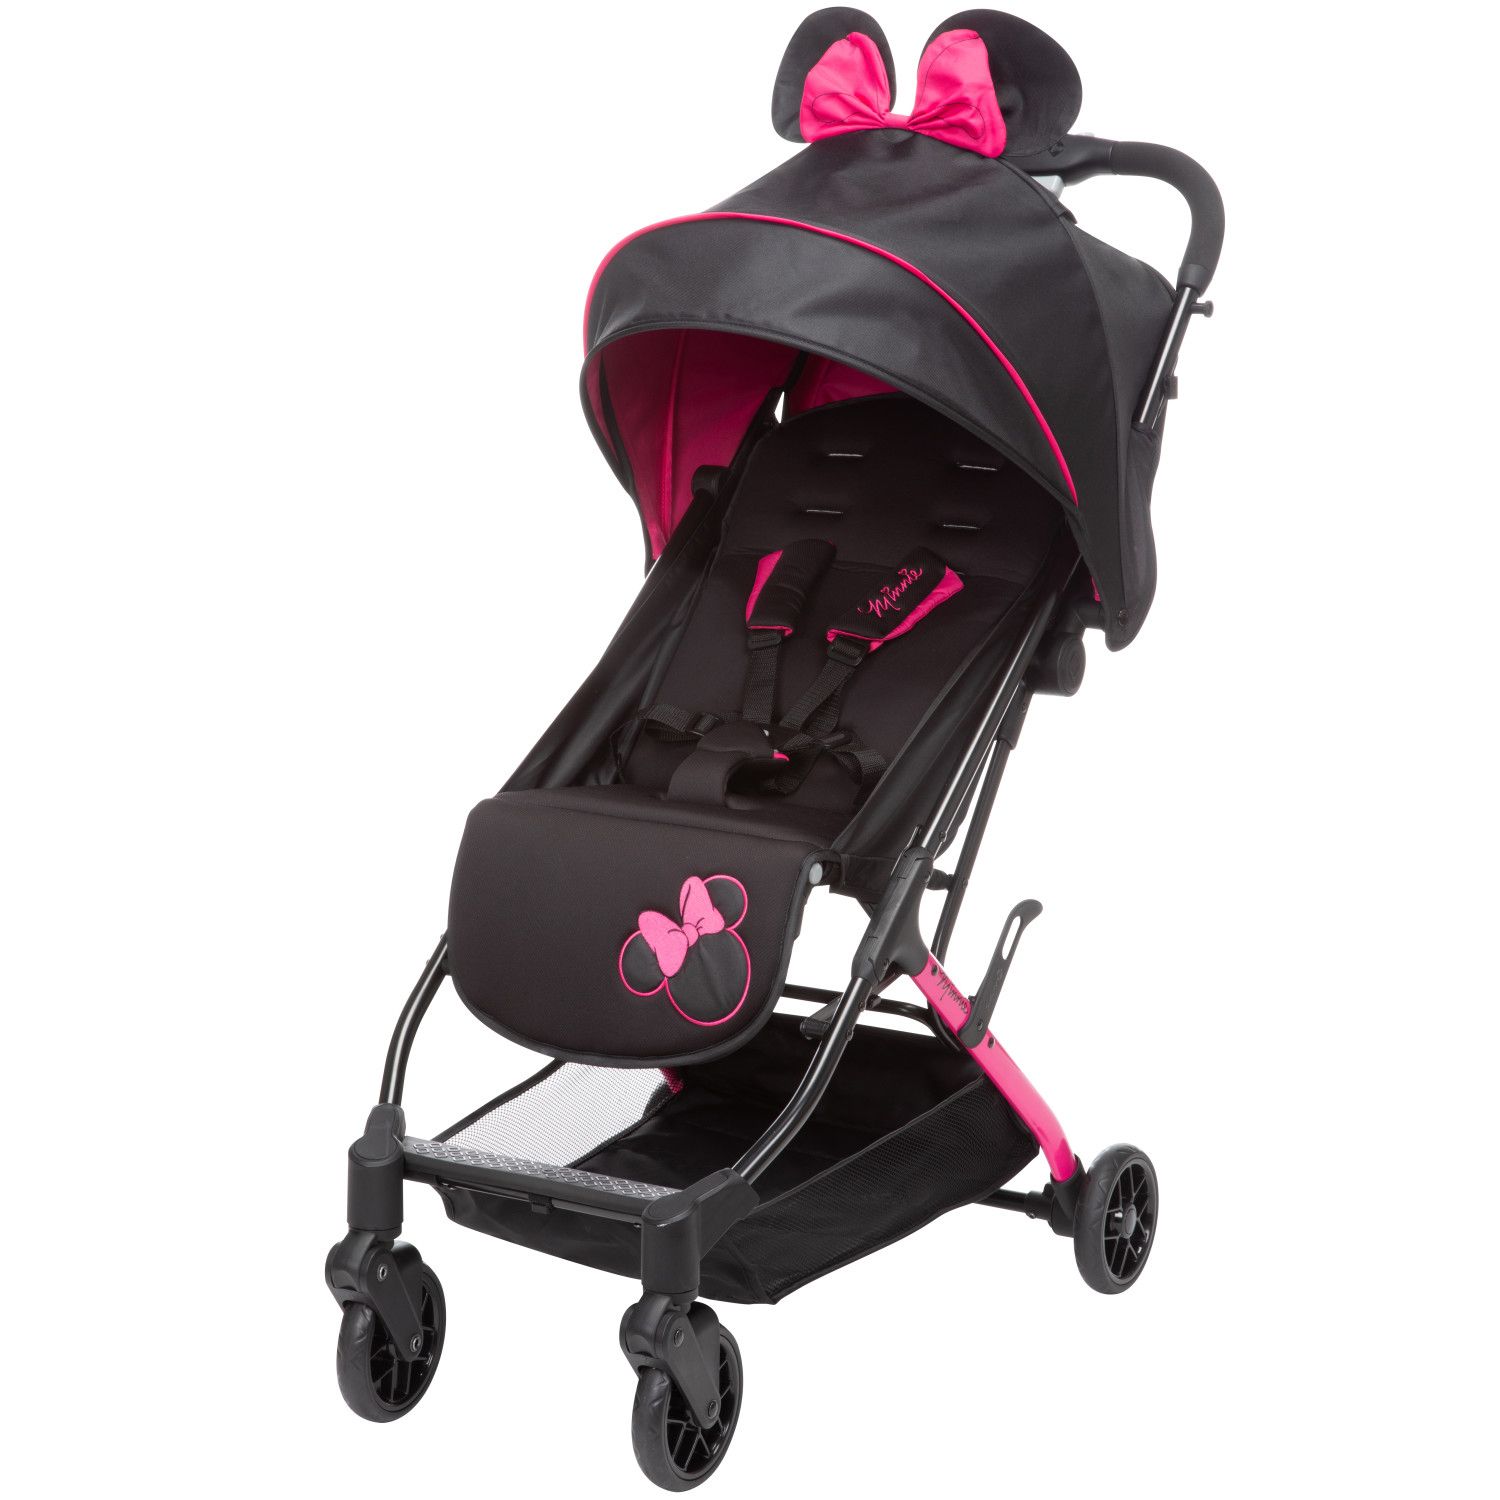 Image for Disney 's Minnie Mouse Baby Teeny Ultra Compact Stroller at Kohl's.